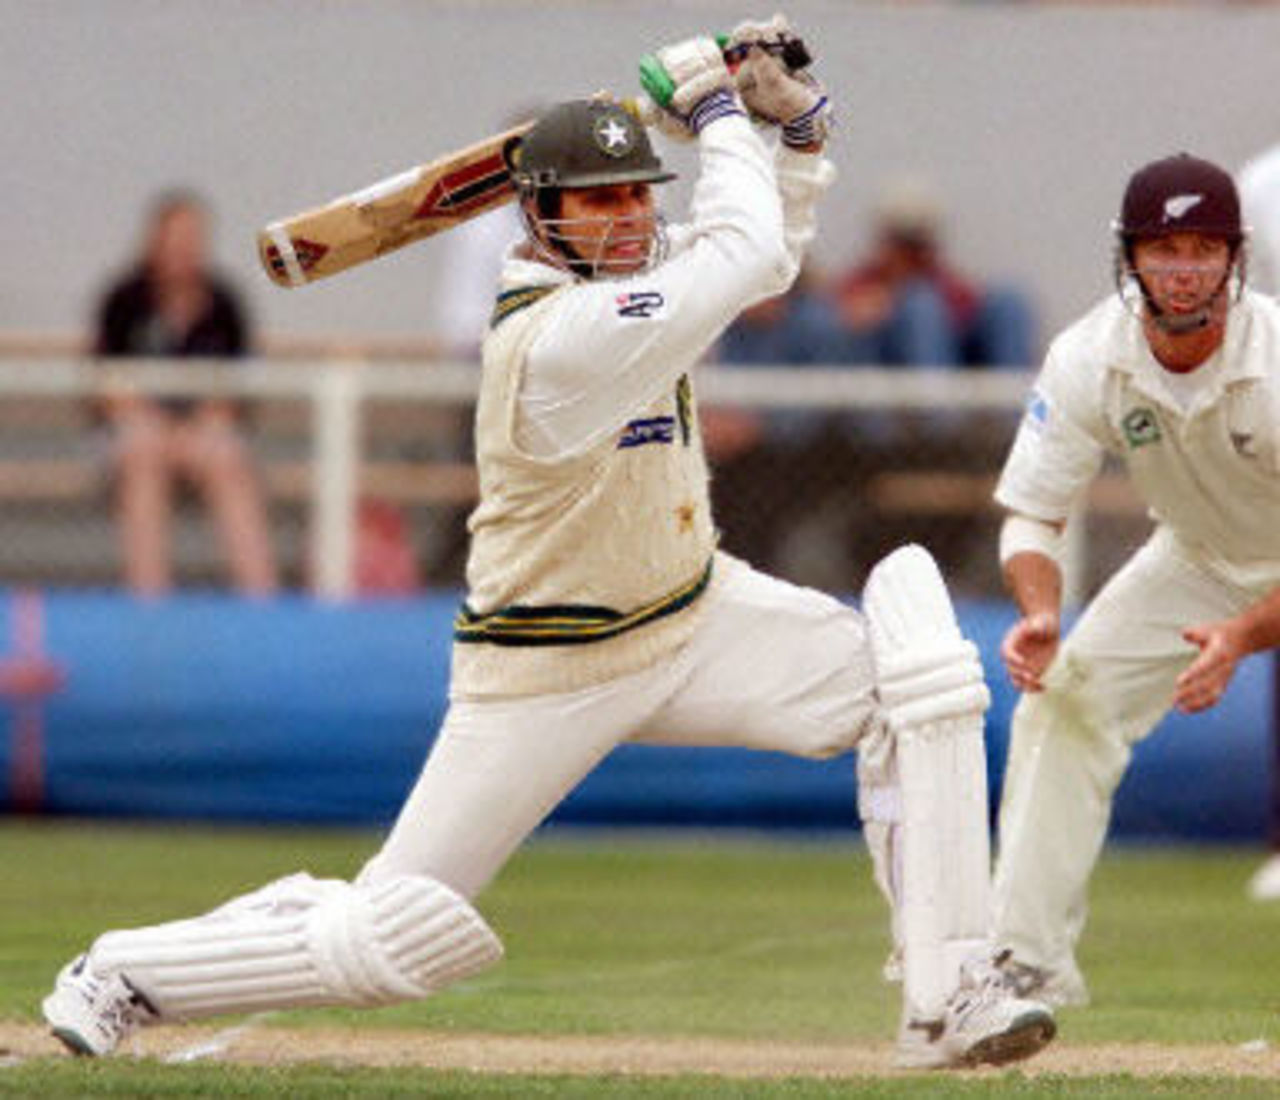 Inzamam-ul-Haq smashes the ball through the covers on the way to scoring his century against New Zealand, day 3, 2nd Test at Christchurch, 15-19 March 2001.